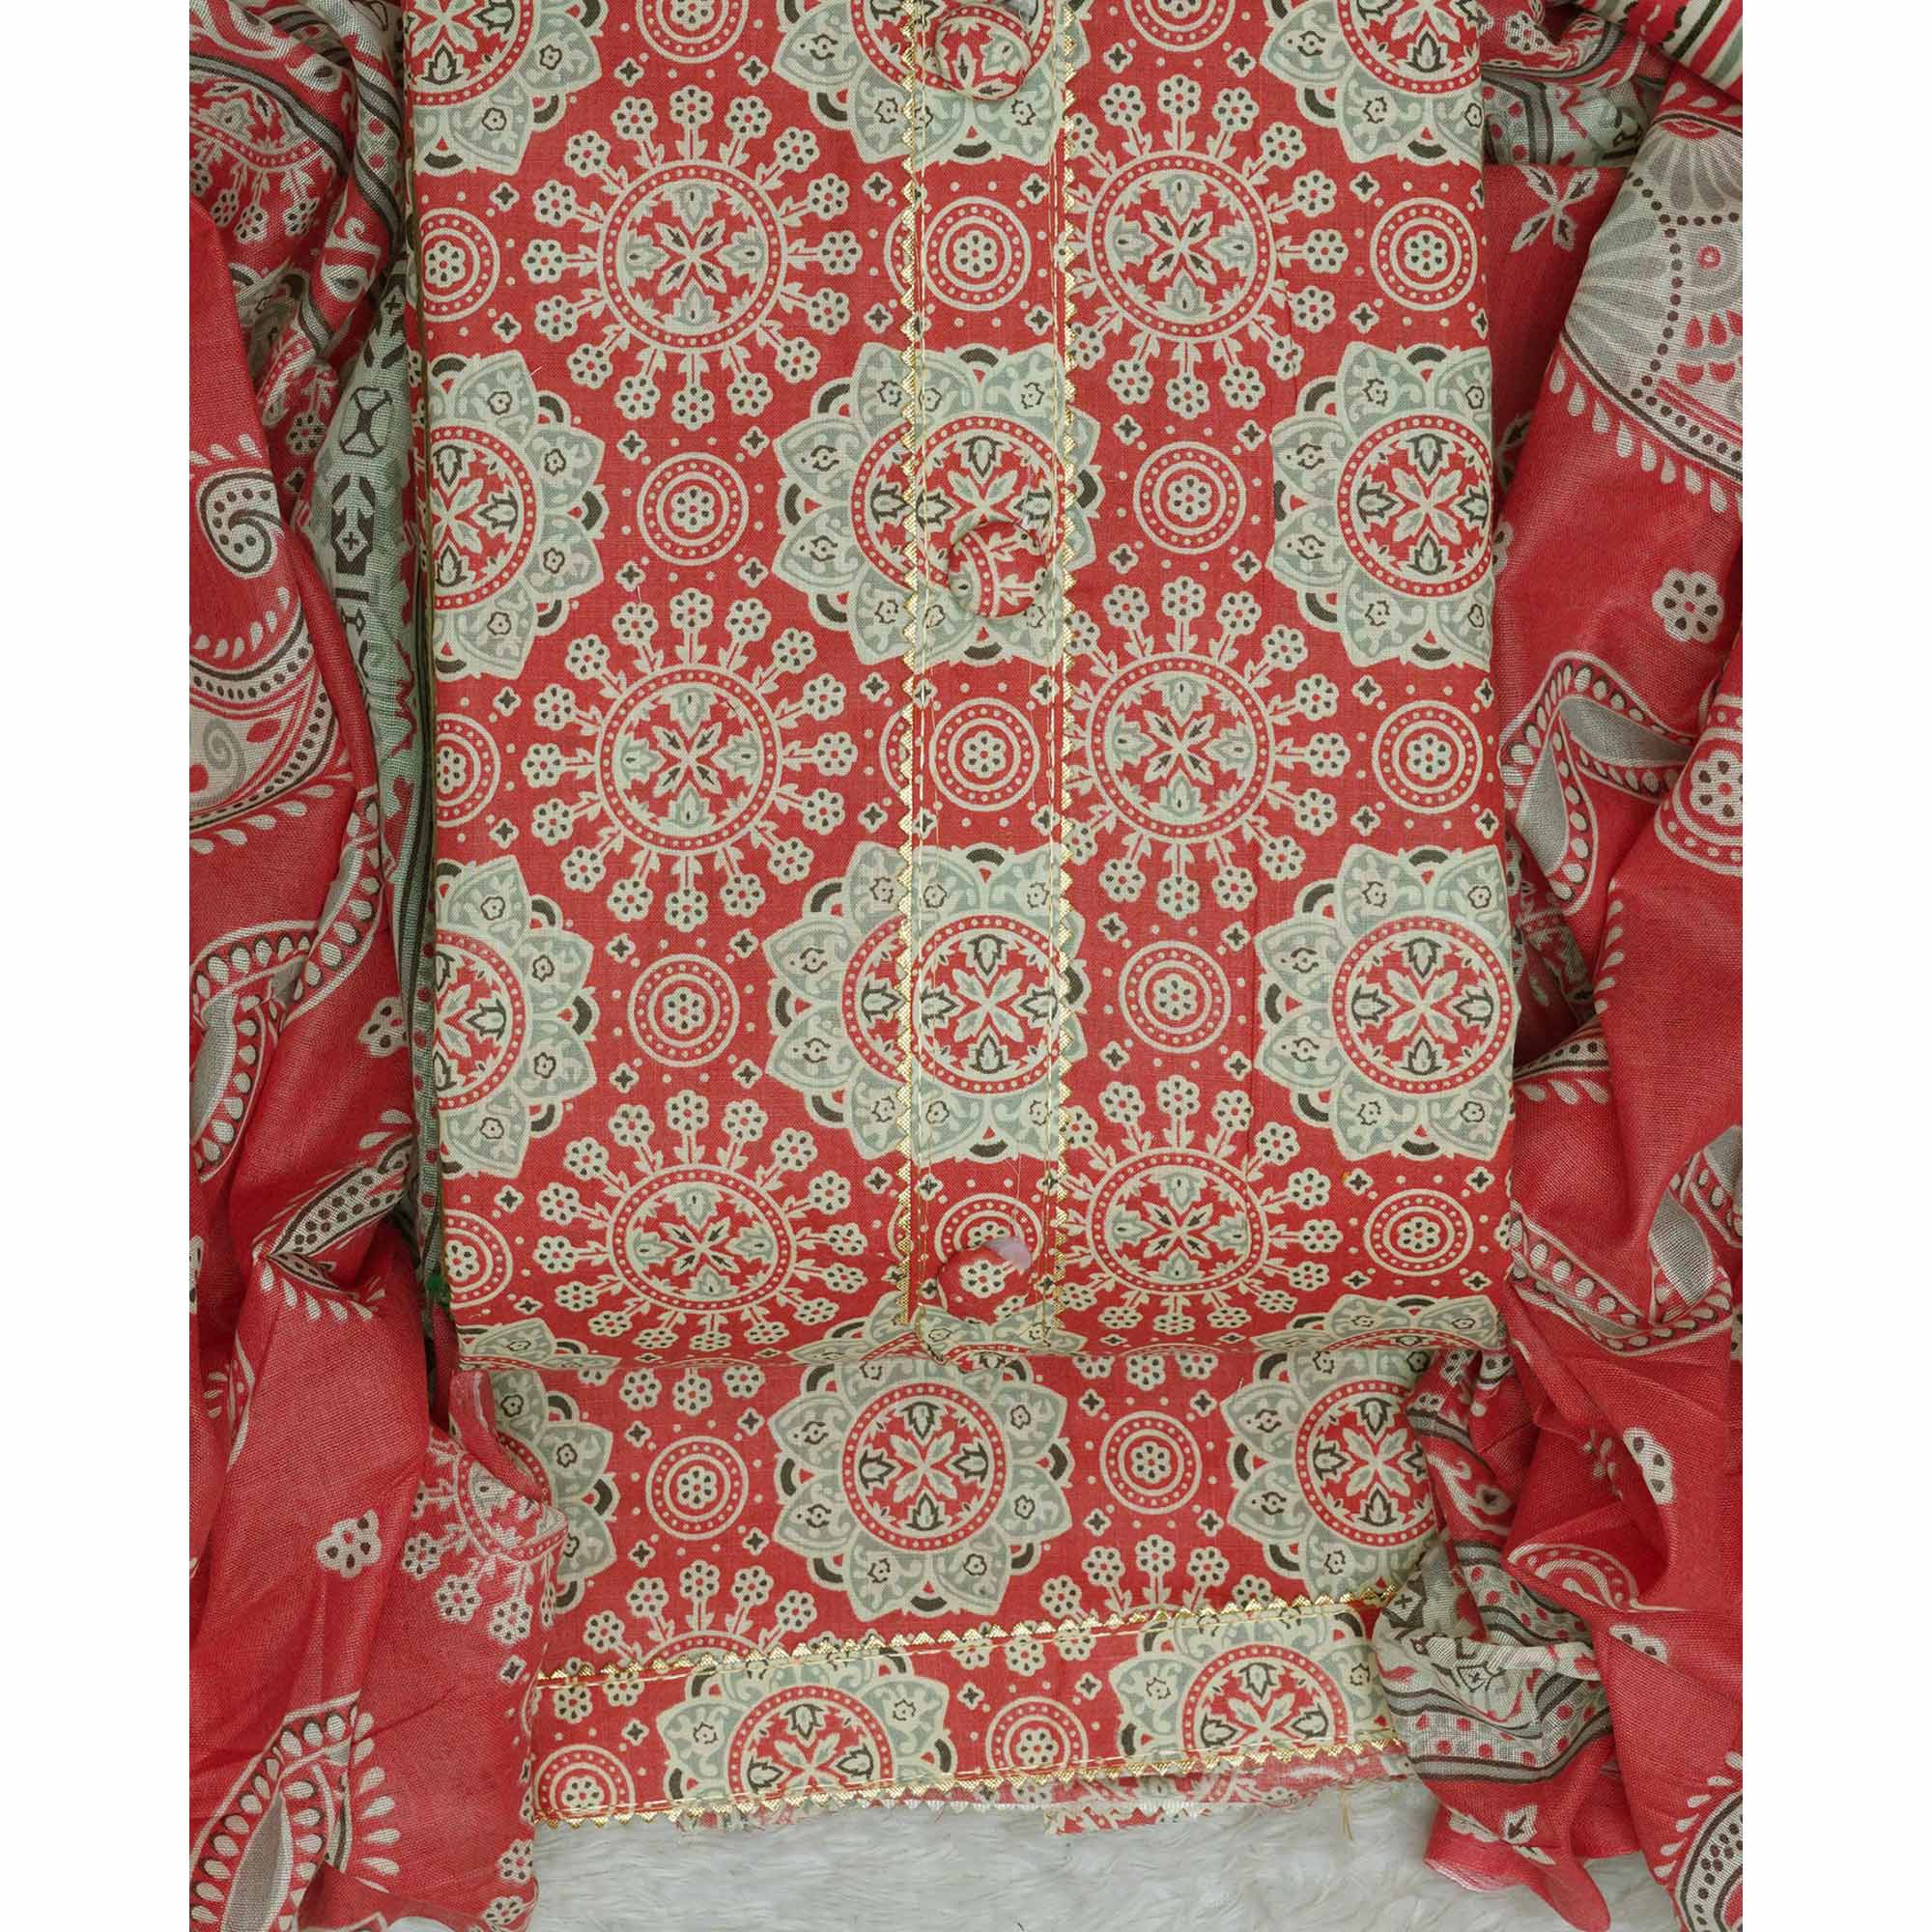 Red Floral Printed Cotton Blend Dress Material